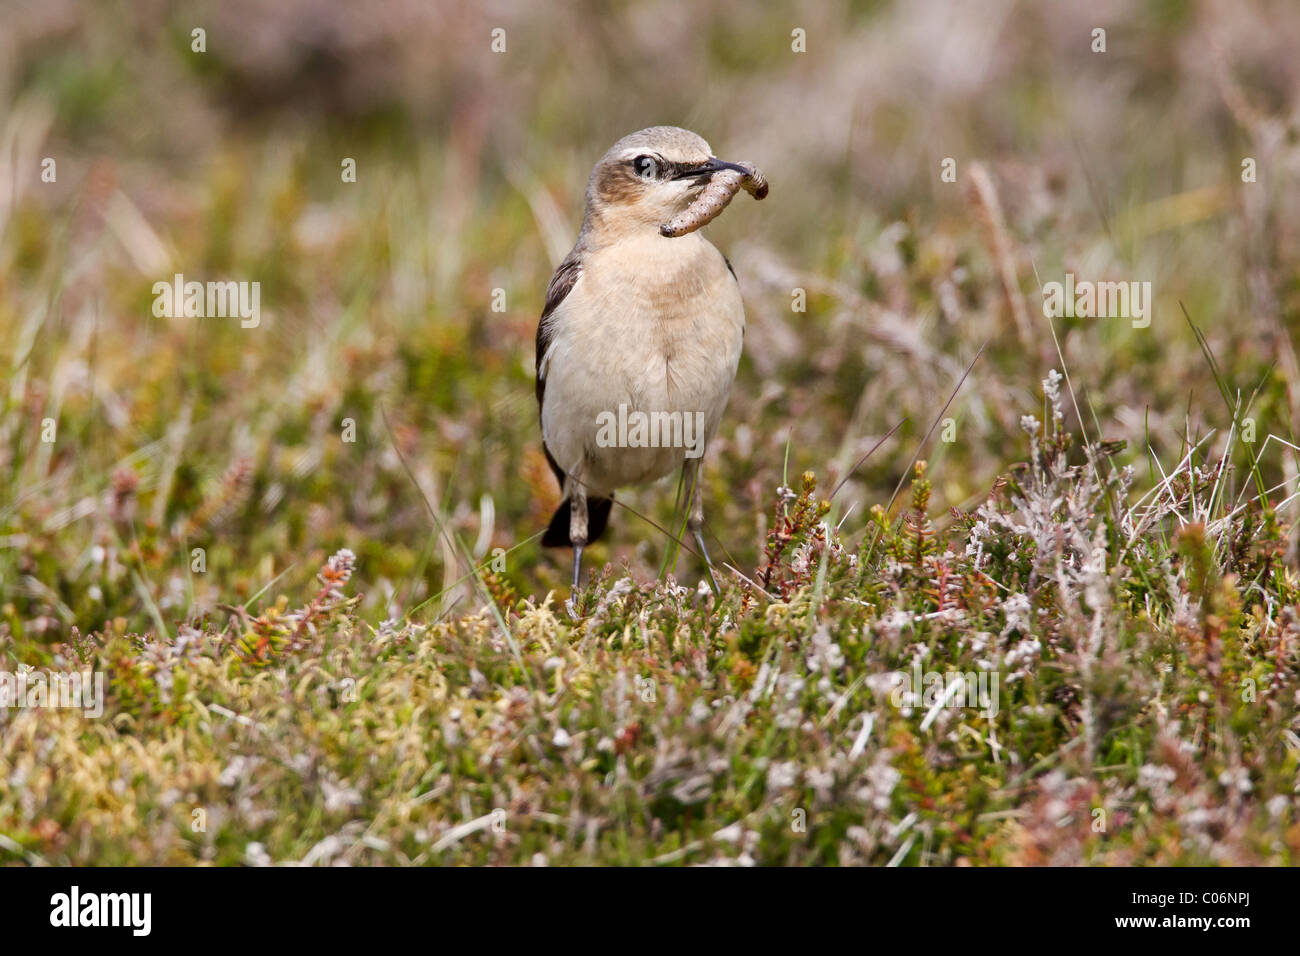 Wheatear posing in a moorland setting with insects in its beak Stock Photo